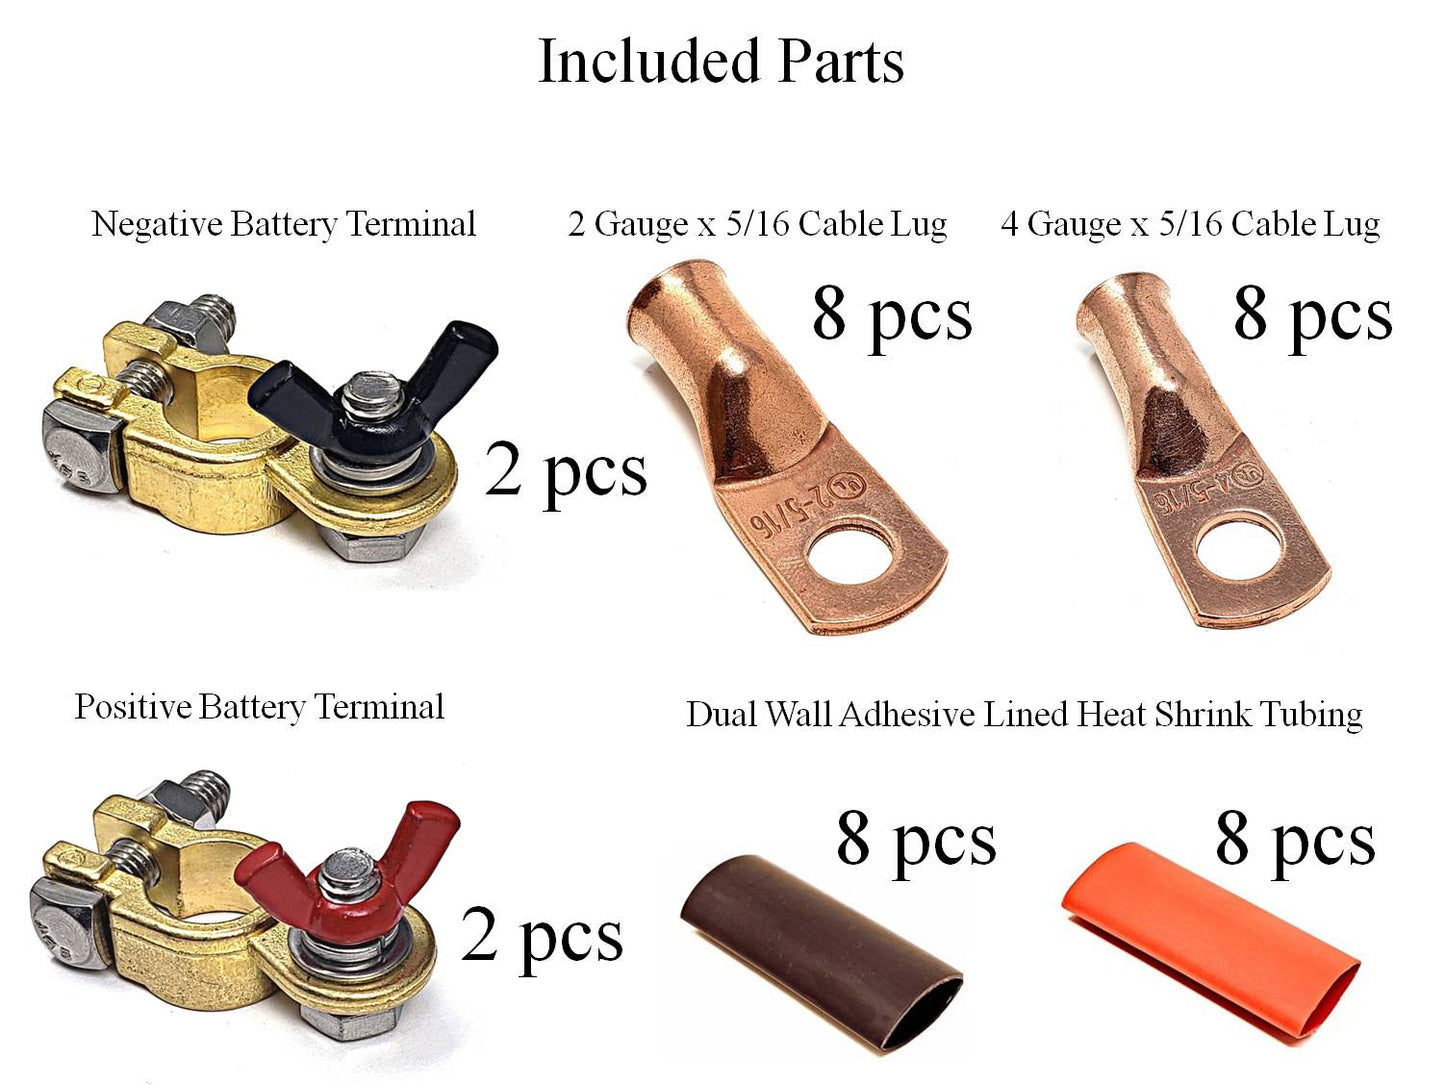 Marine Grade Battery Terminal Top Post Kit for RV, Trucks, Boats, Cars, Campers, Golf Carts (Military Spec. B-12128C)